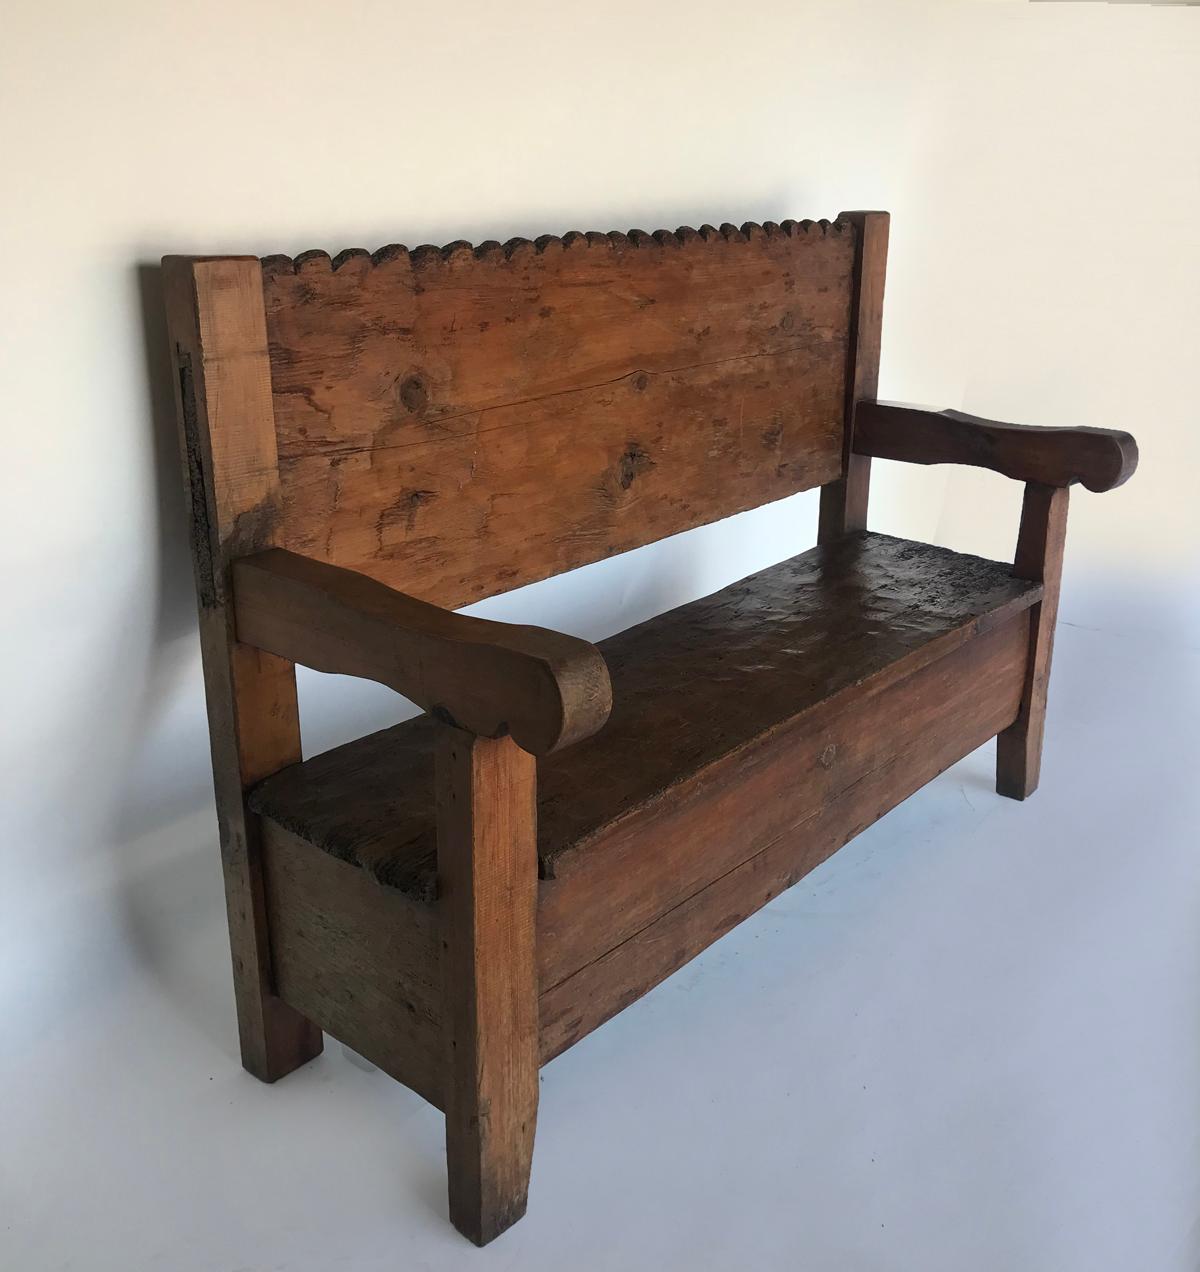 Guatemalan Petite Rustic Vintage Chajul Bench with Scalloped Back